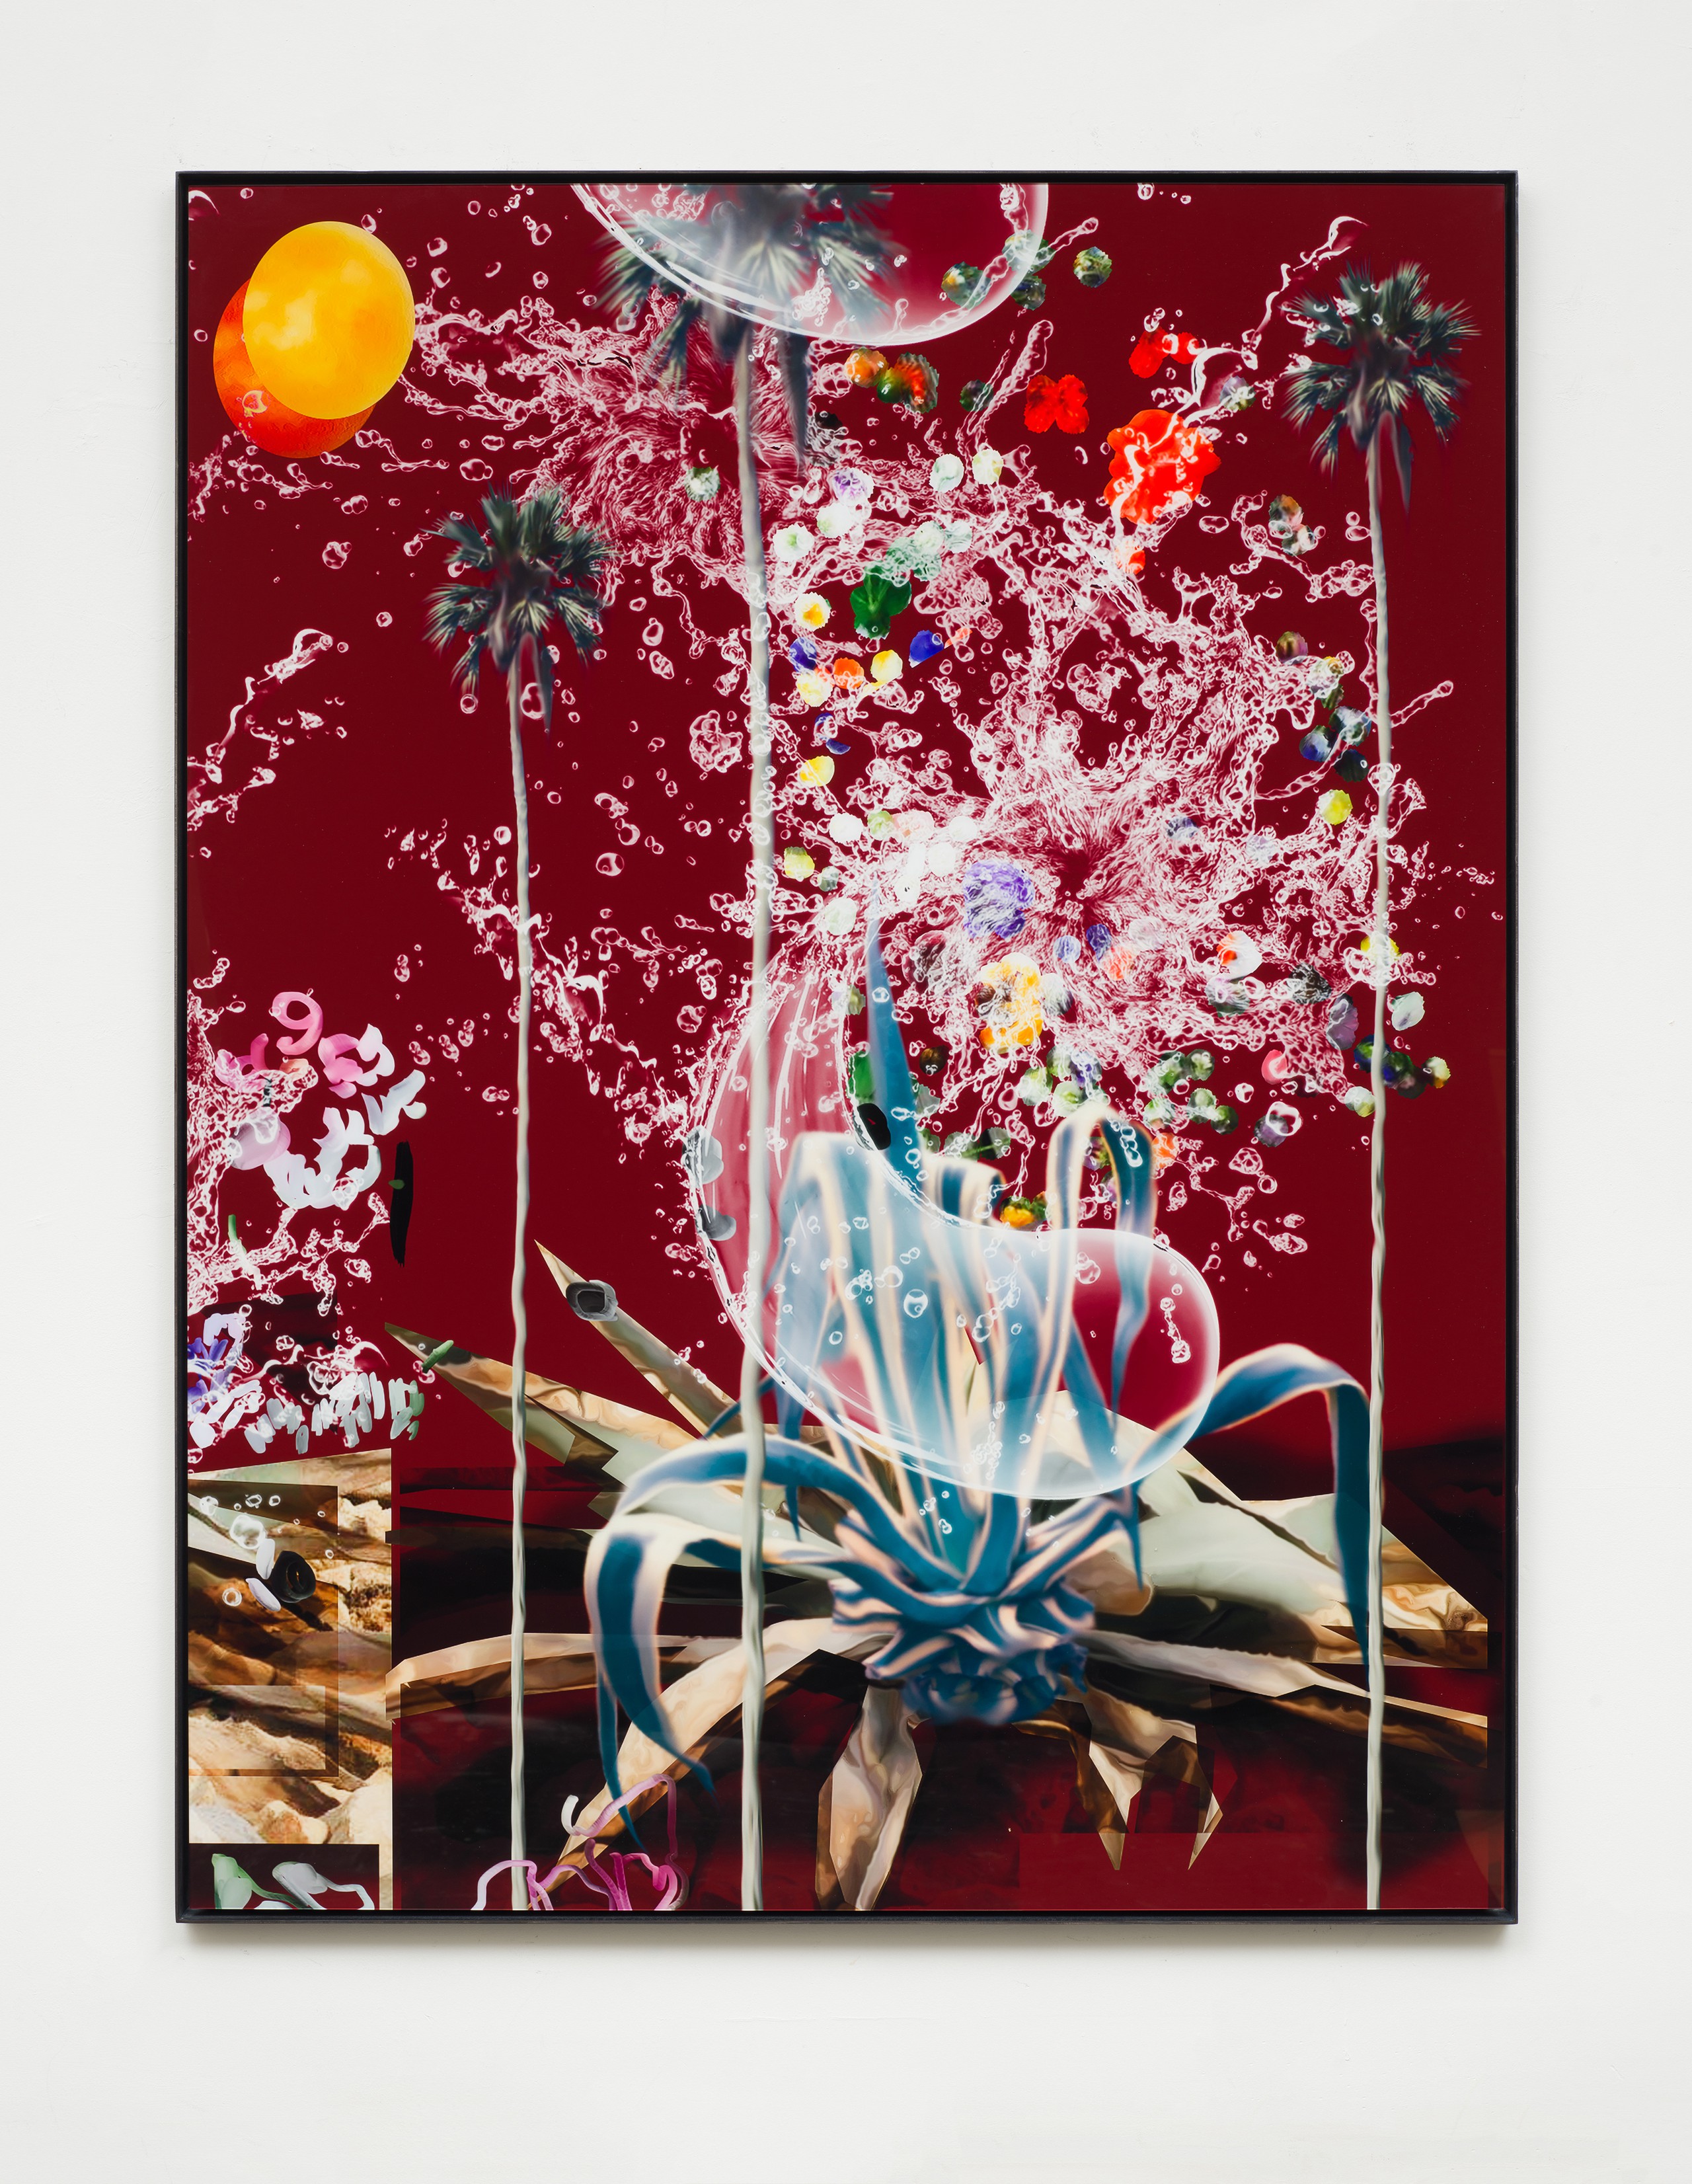 Petra Cortright, pariscope_picasso mujeres?ra-cw7fa.zip? +Radio, 2018, Digital painting on gloss paper, face mounted, 150 x 107 cm